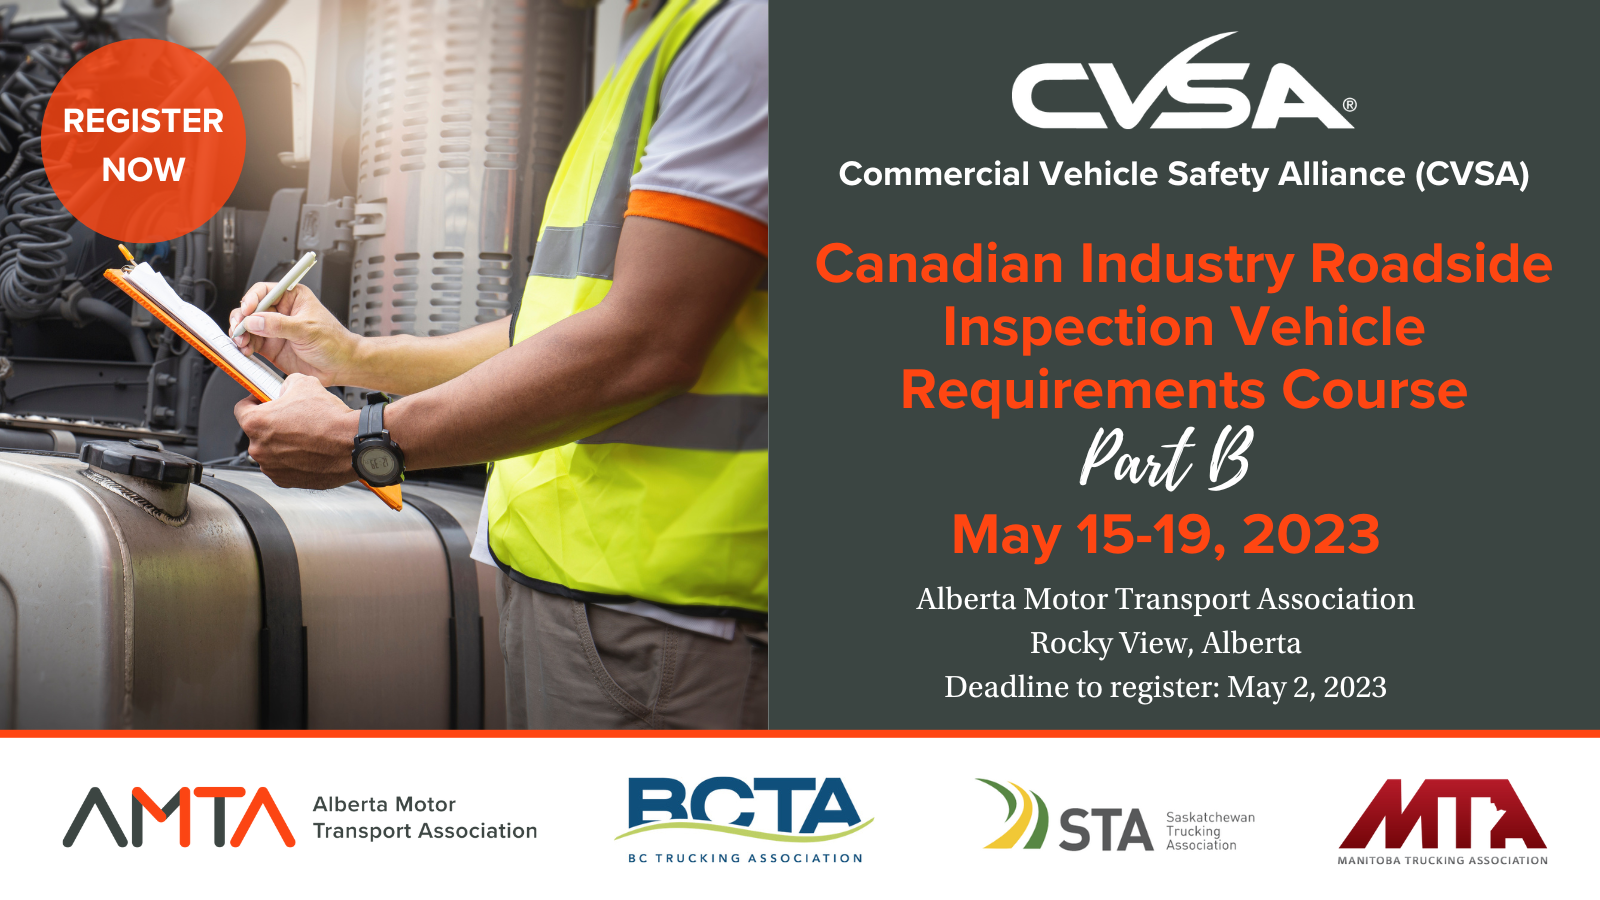 Canadian Industry Roadside Inspection Vehicle Requirements Course Part B on May 15-19, 2023